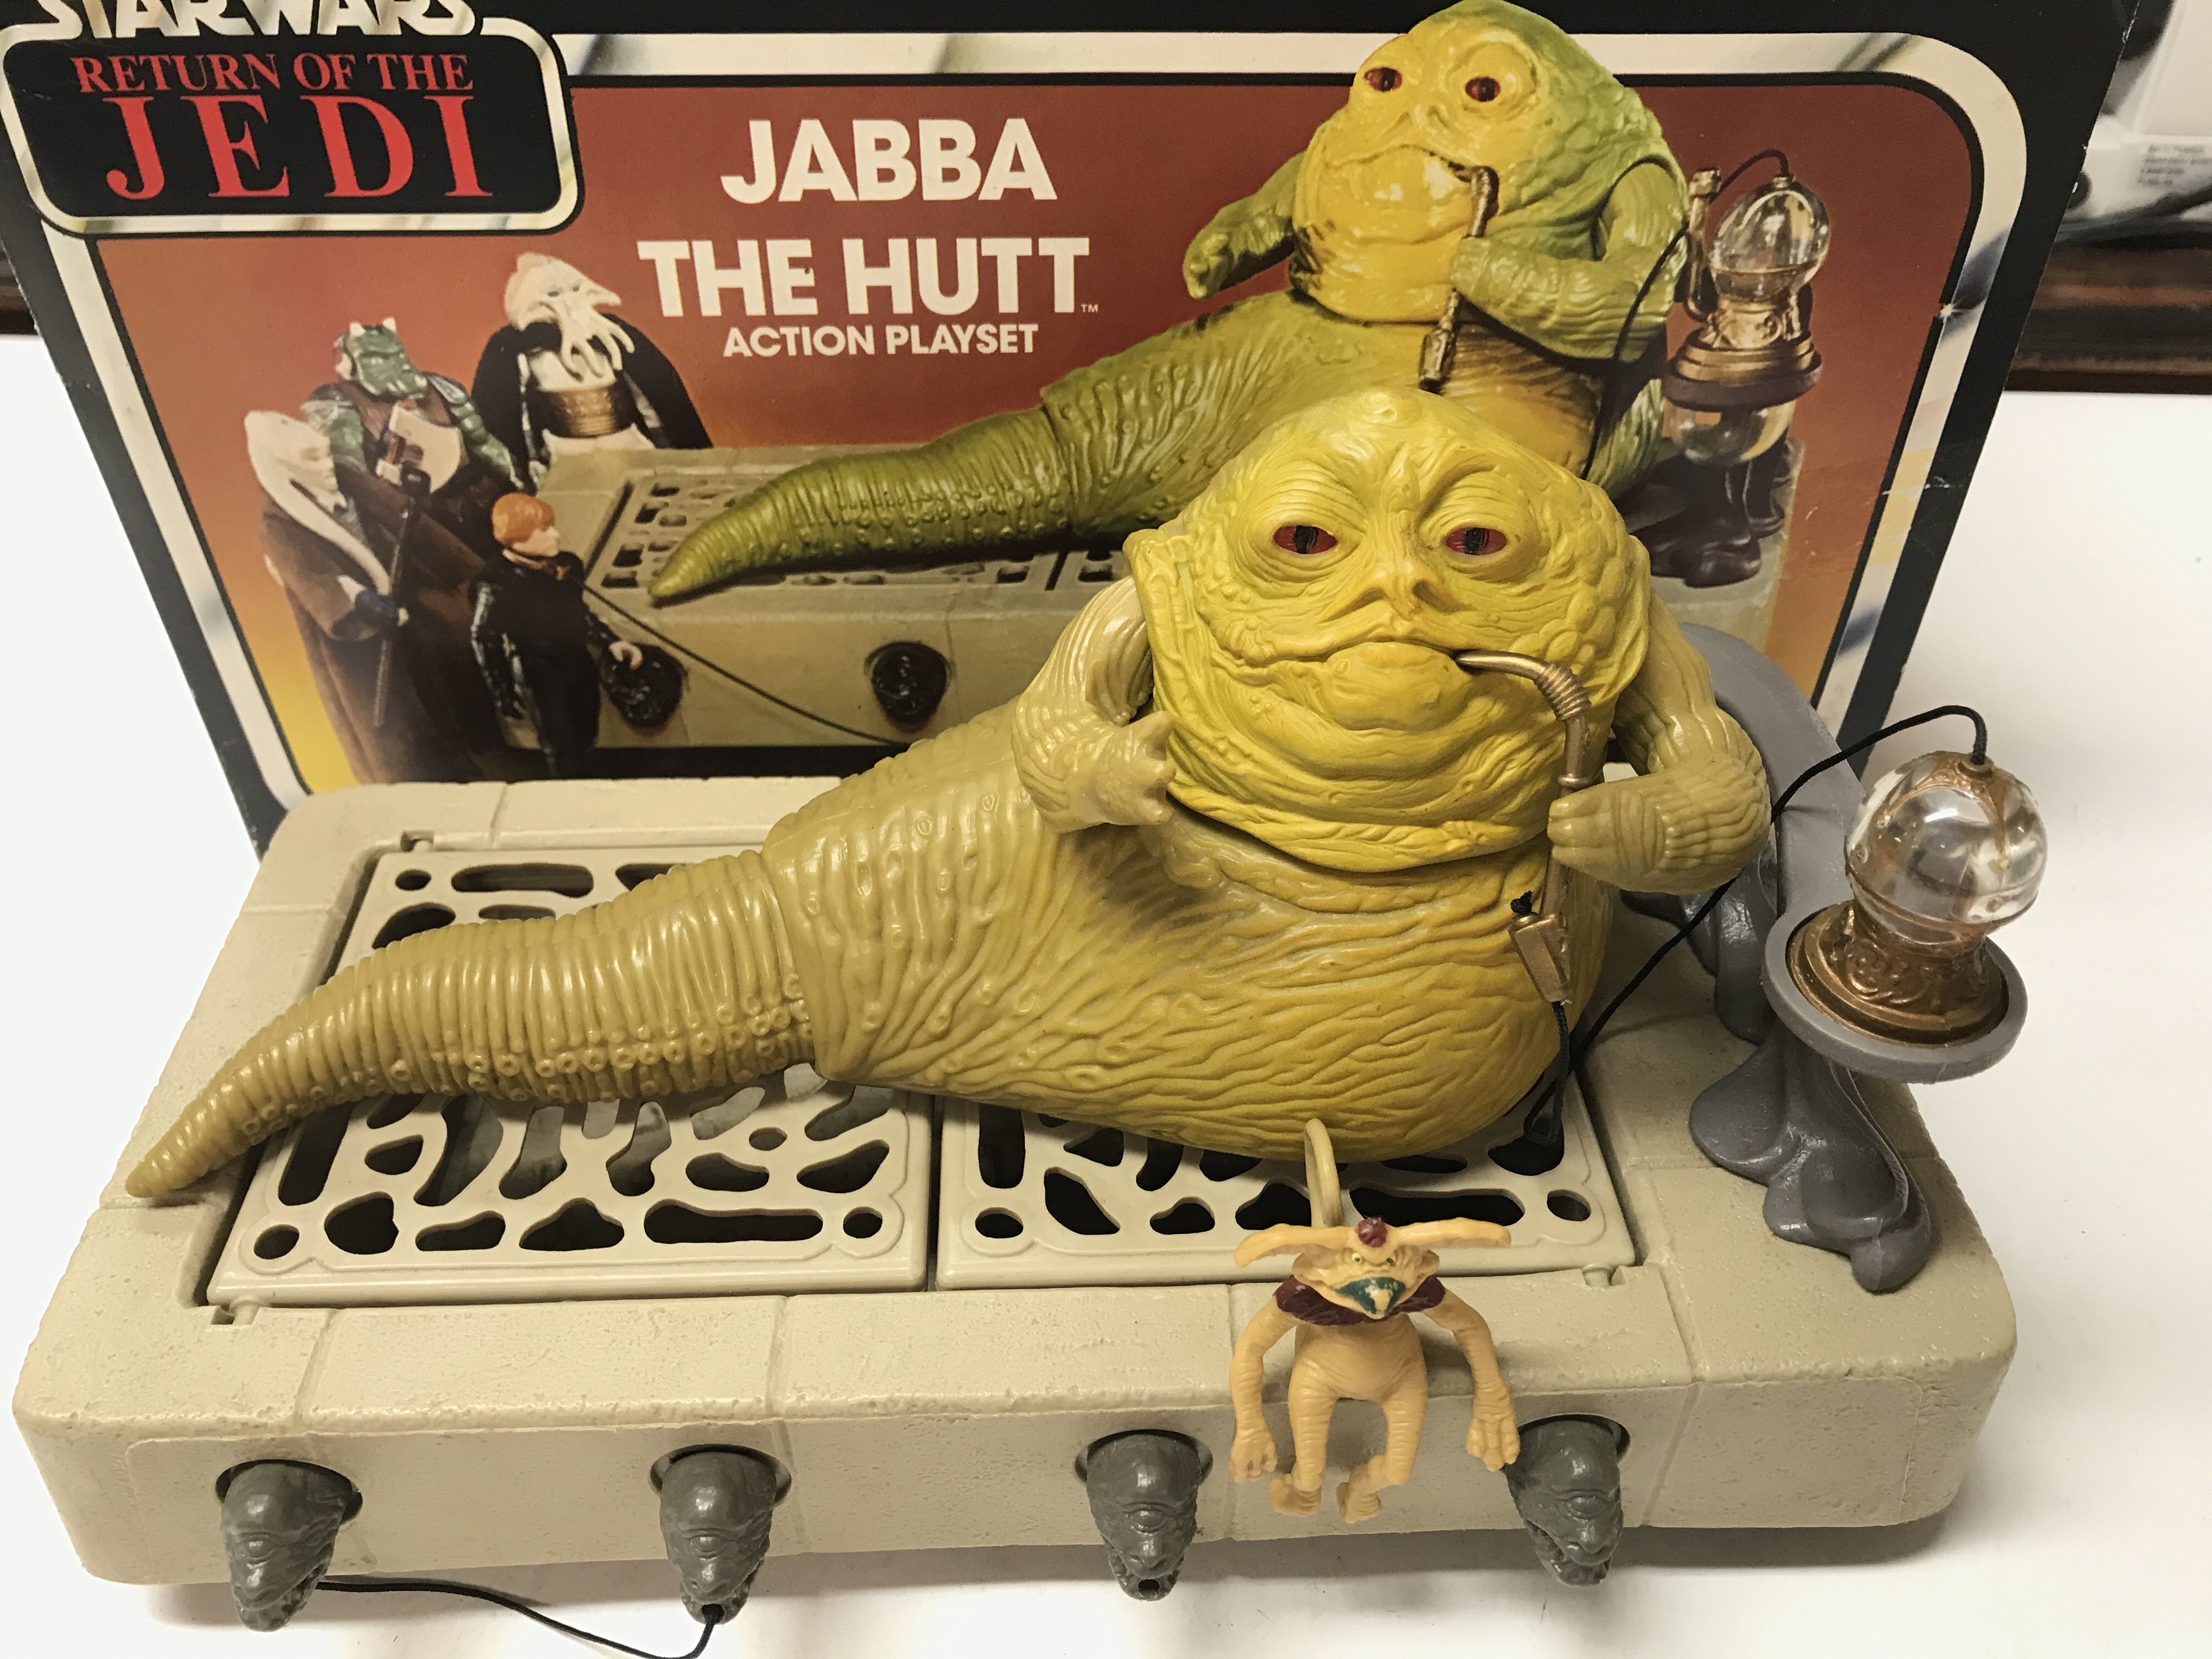 WITHDRAWN - A Boxed Vintage Star Wars Jabba The Hut Playset. 1 Part Missing.